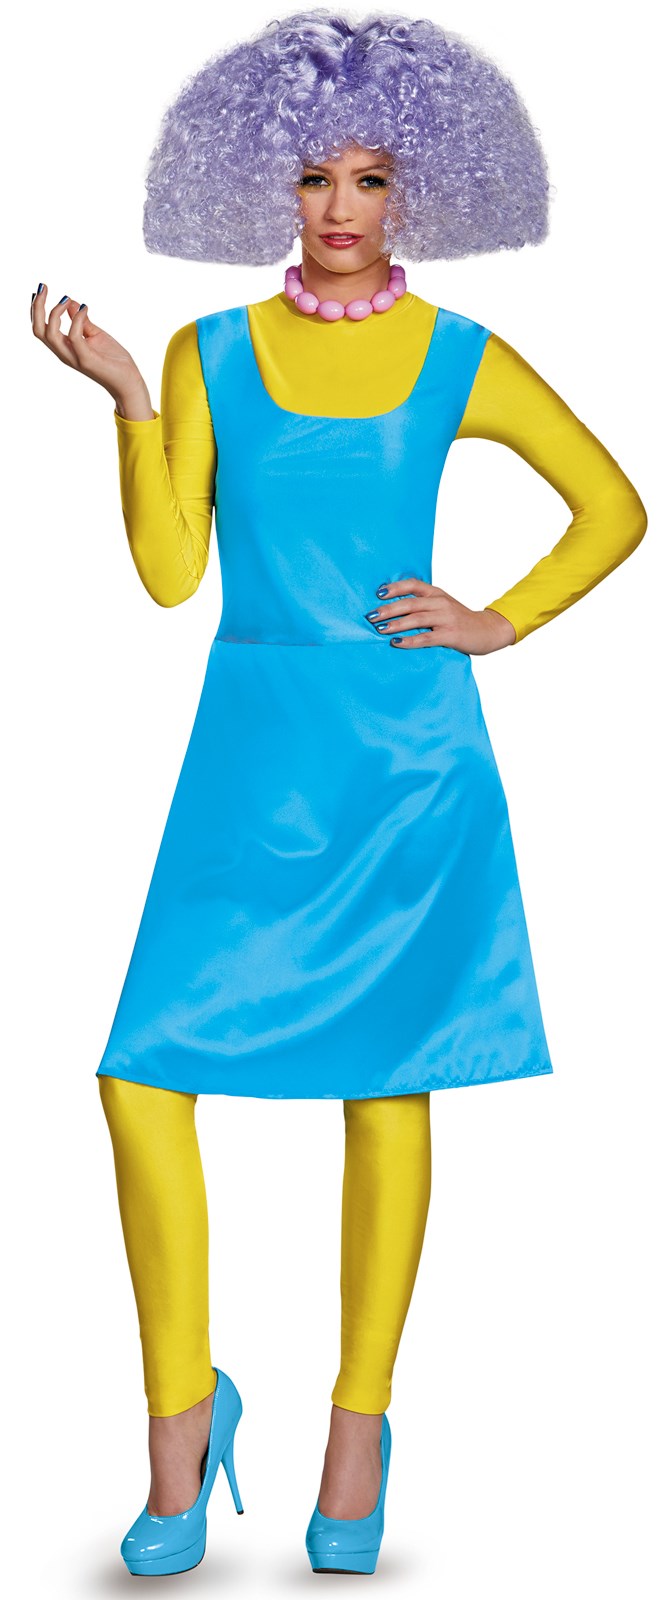 The Simpsons: Deluxe Selma Costume For Adults